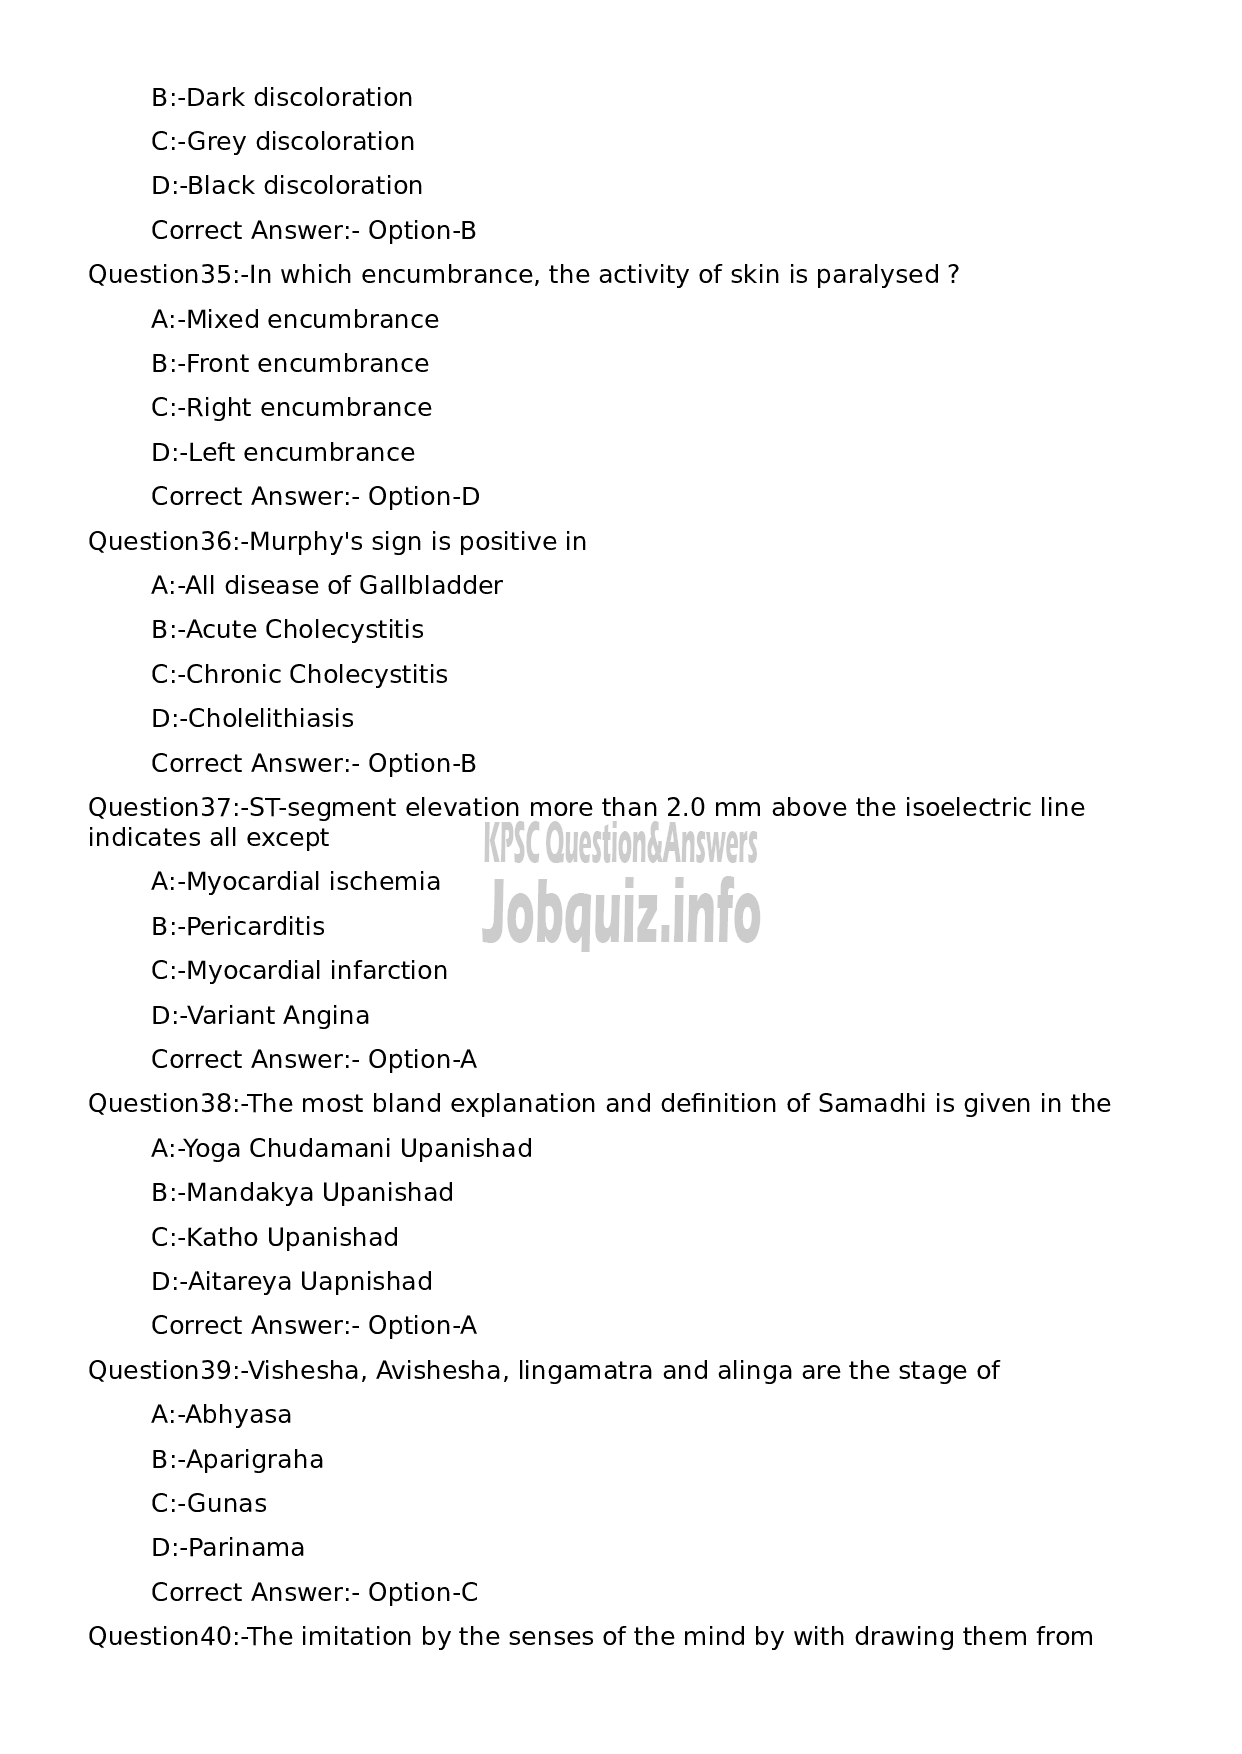 Kerala PSC Question Paper - Medical Officer (Nature Cure)-7